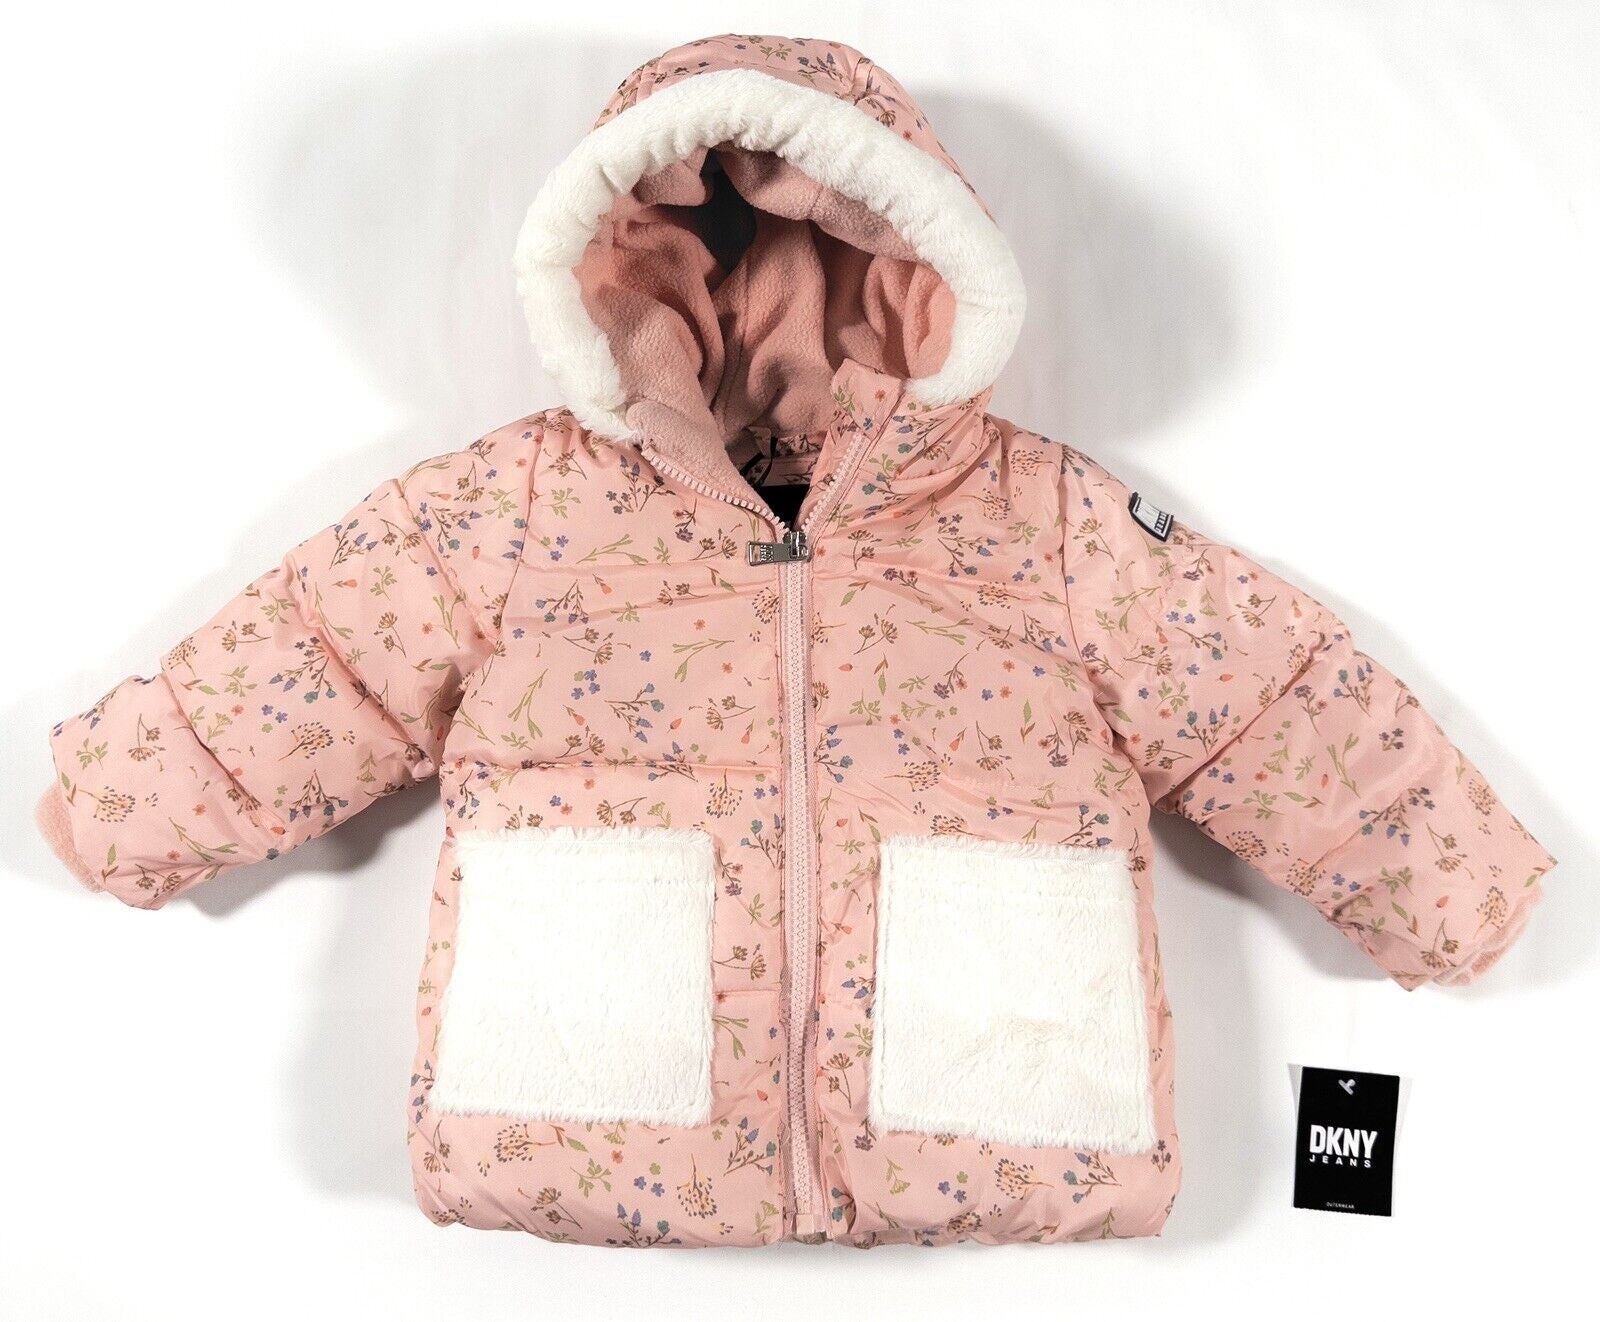 DKNY JEANS Baby Girl Pink Floral Coat Hooded Size UK 18 Months